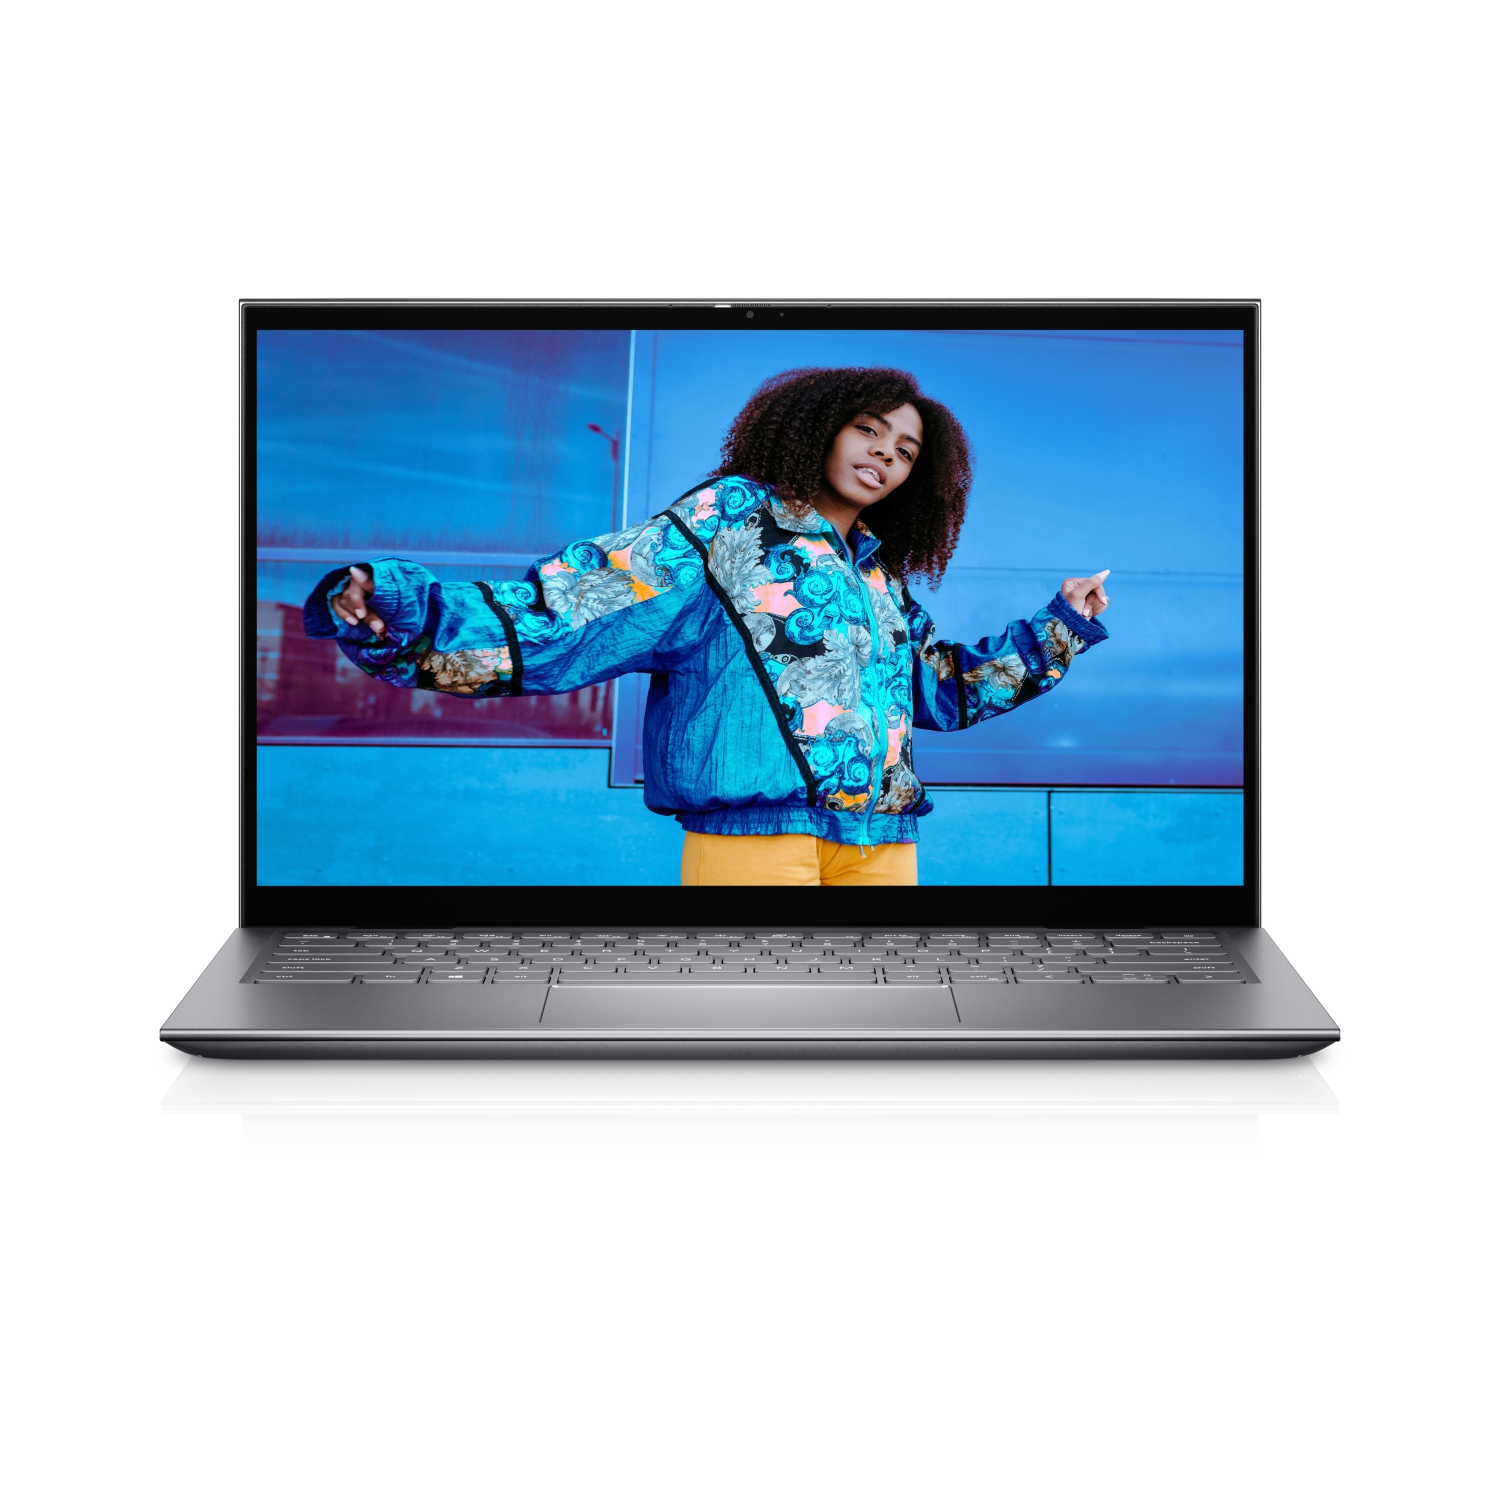 Refurbished (Excellent) – Dell Inspiron 5410 2-in-1 (2021) | 14" FHD Touch | Core i7 - 256GB SSD - 12GB RAM | 4 Cores @ 4.7 GHz - 11th Gen CPU